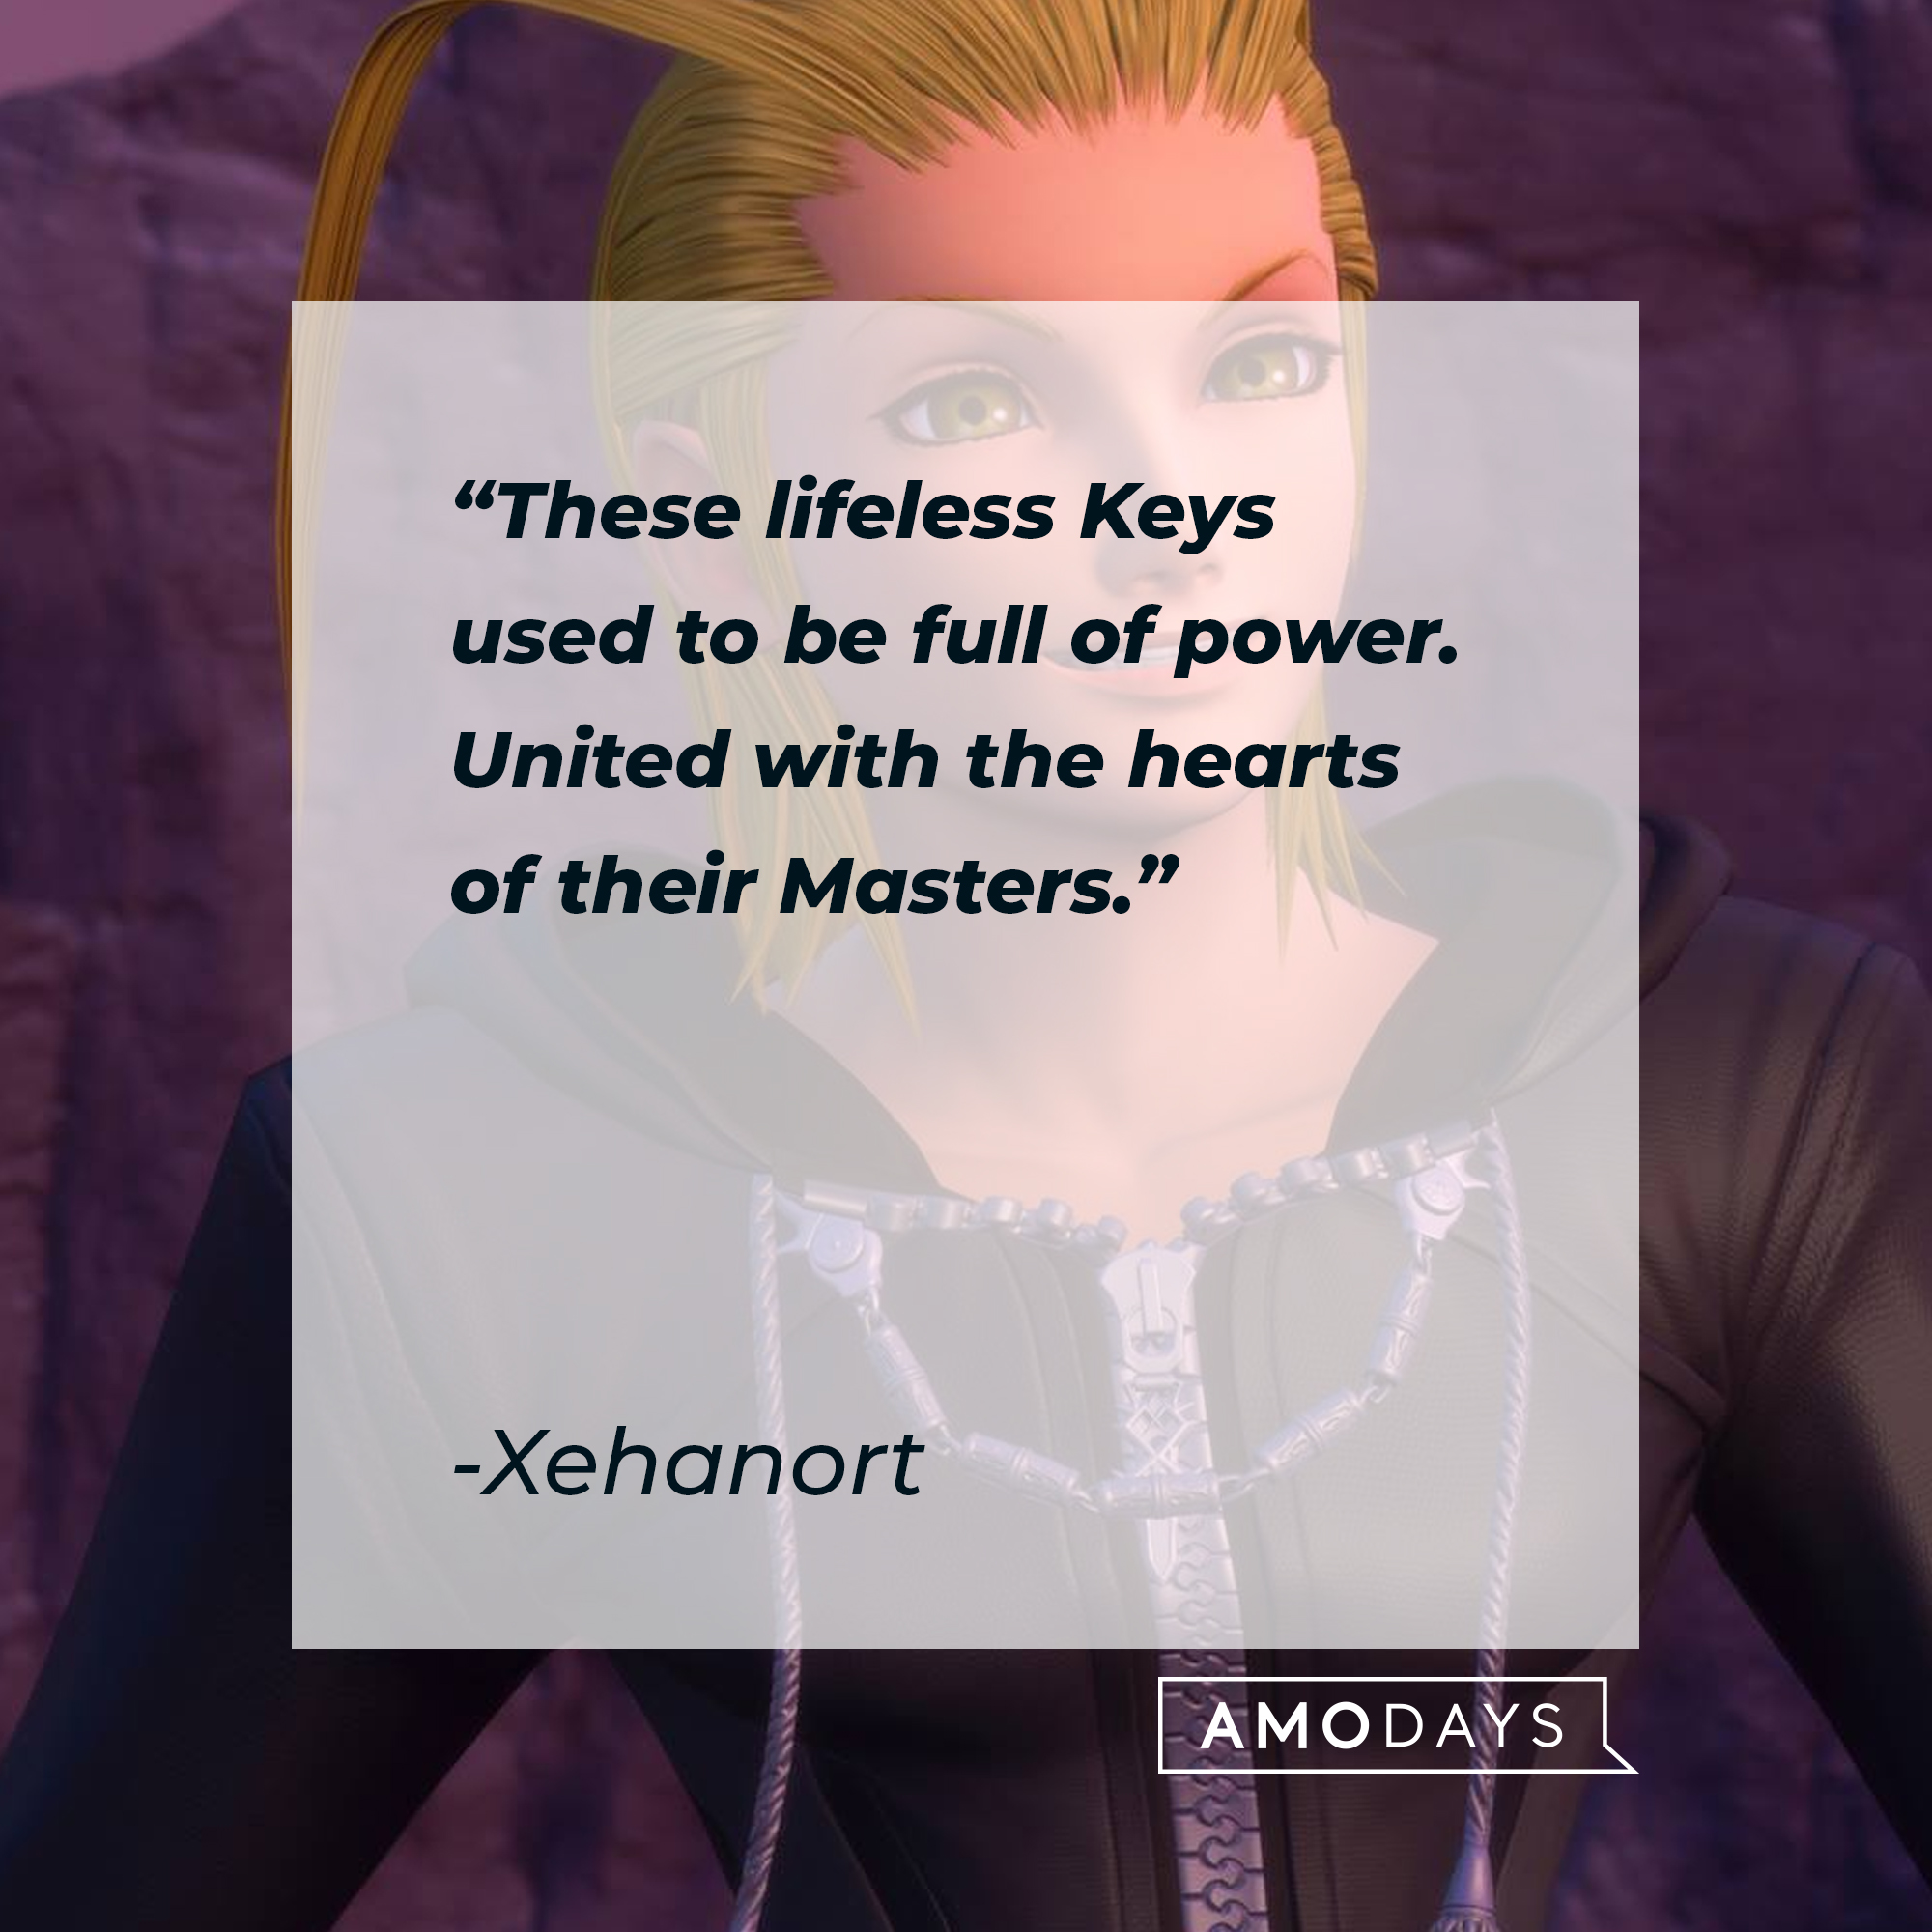 An image of Larxene with Xehanort’s quote: "Behold. These lifeless Keys used to be full of power. United with the hearts of their Masters." | Source: facebook.com/KingdomHearts